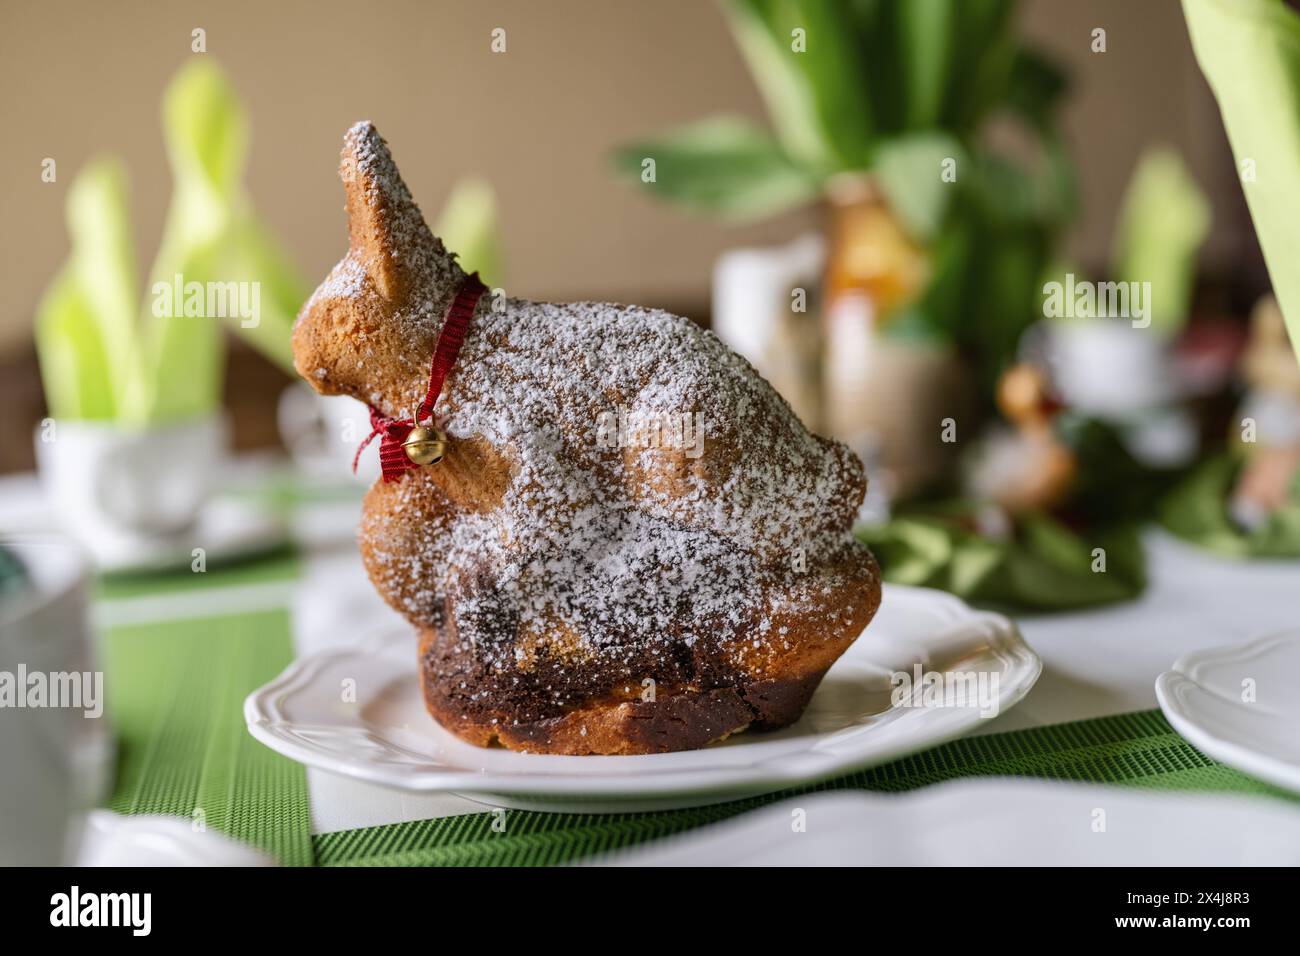 Powdered sugar-coated Easter cake shaped like a bunny with a red ribbon on a spring table. Stock Photo